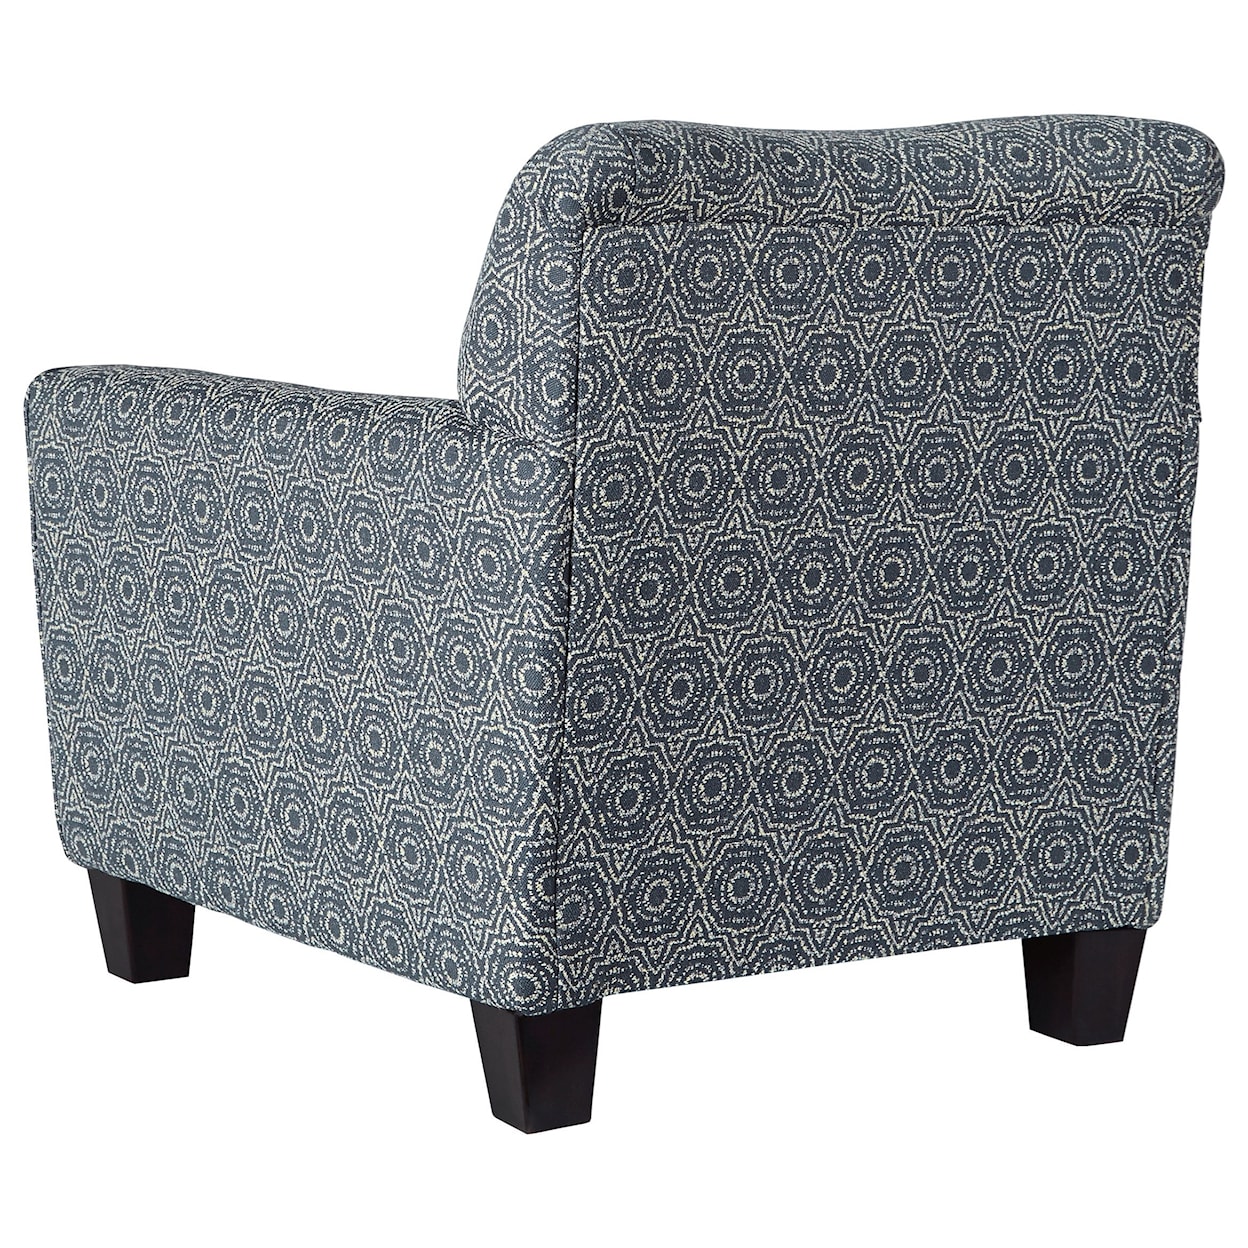 Michael Alan Select Brinsmade Accent Chair